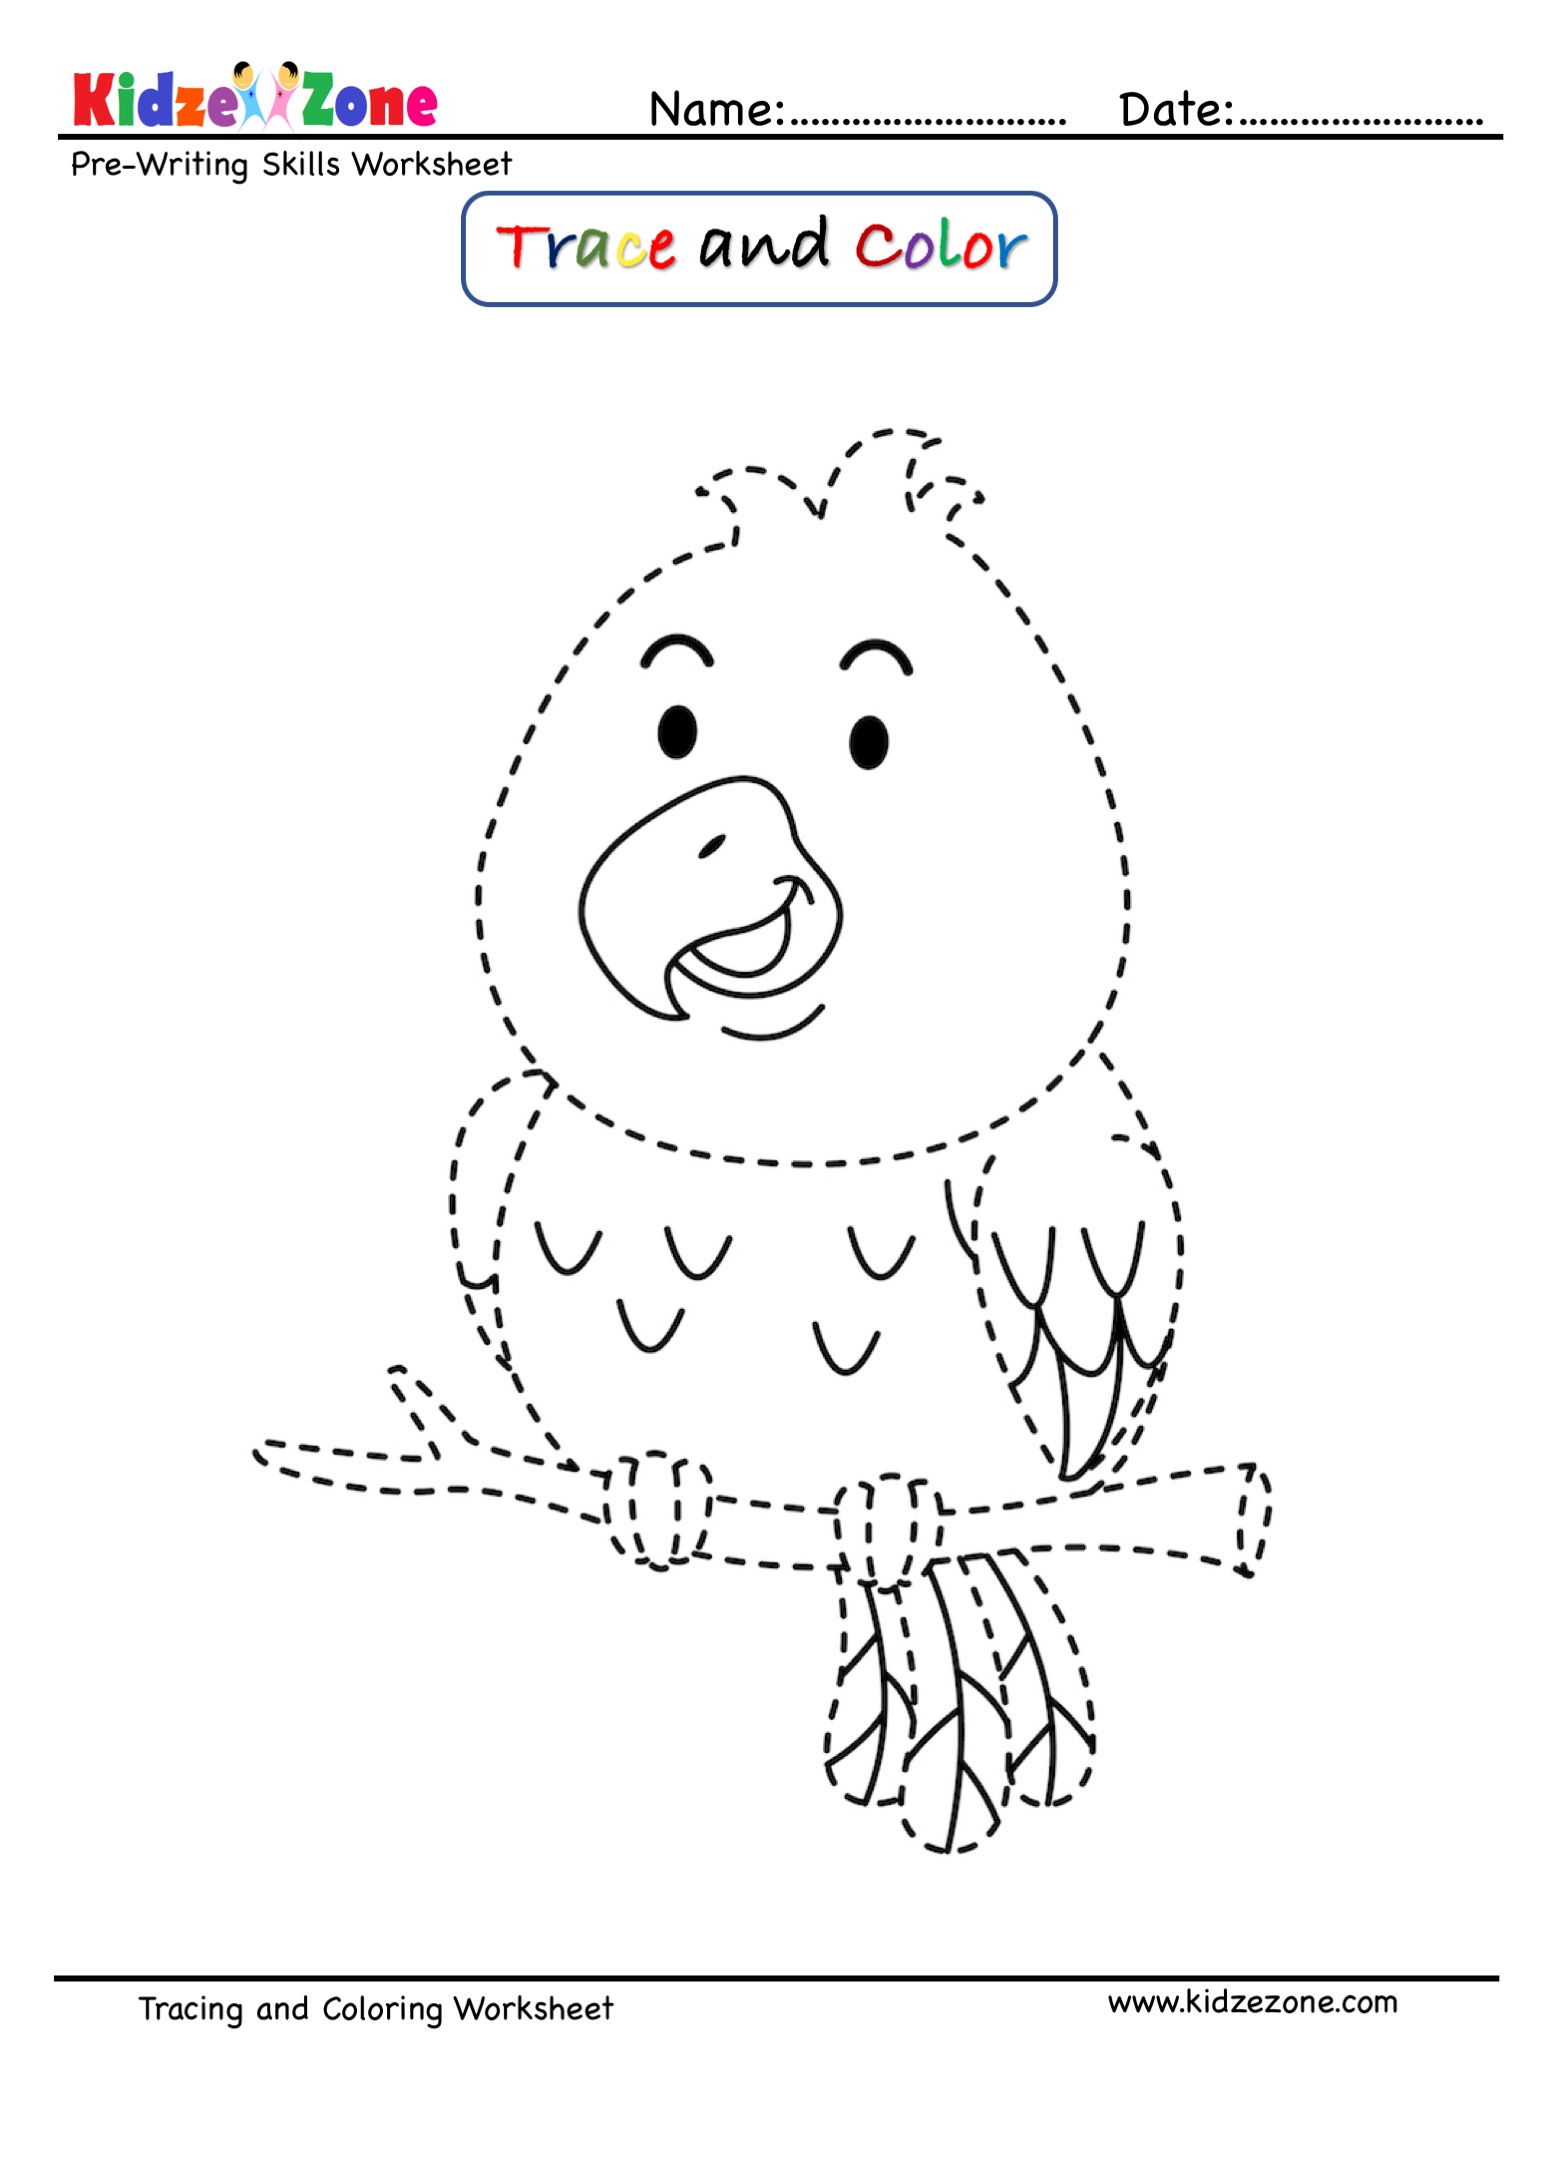 Parrot Cartoon Trace and Color Worksheet - KidzeZone